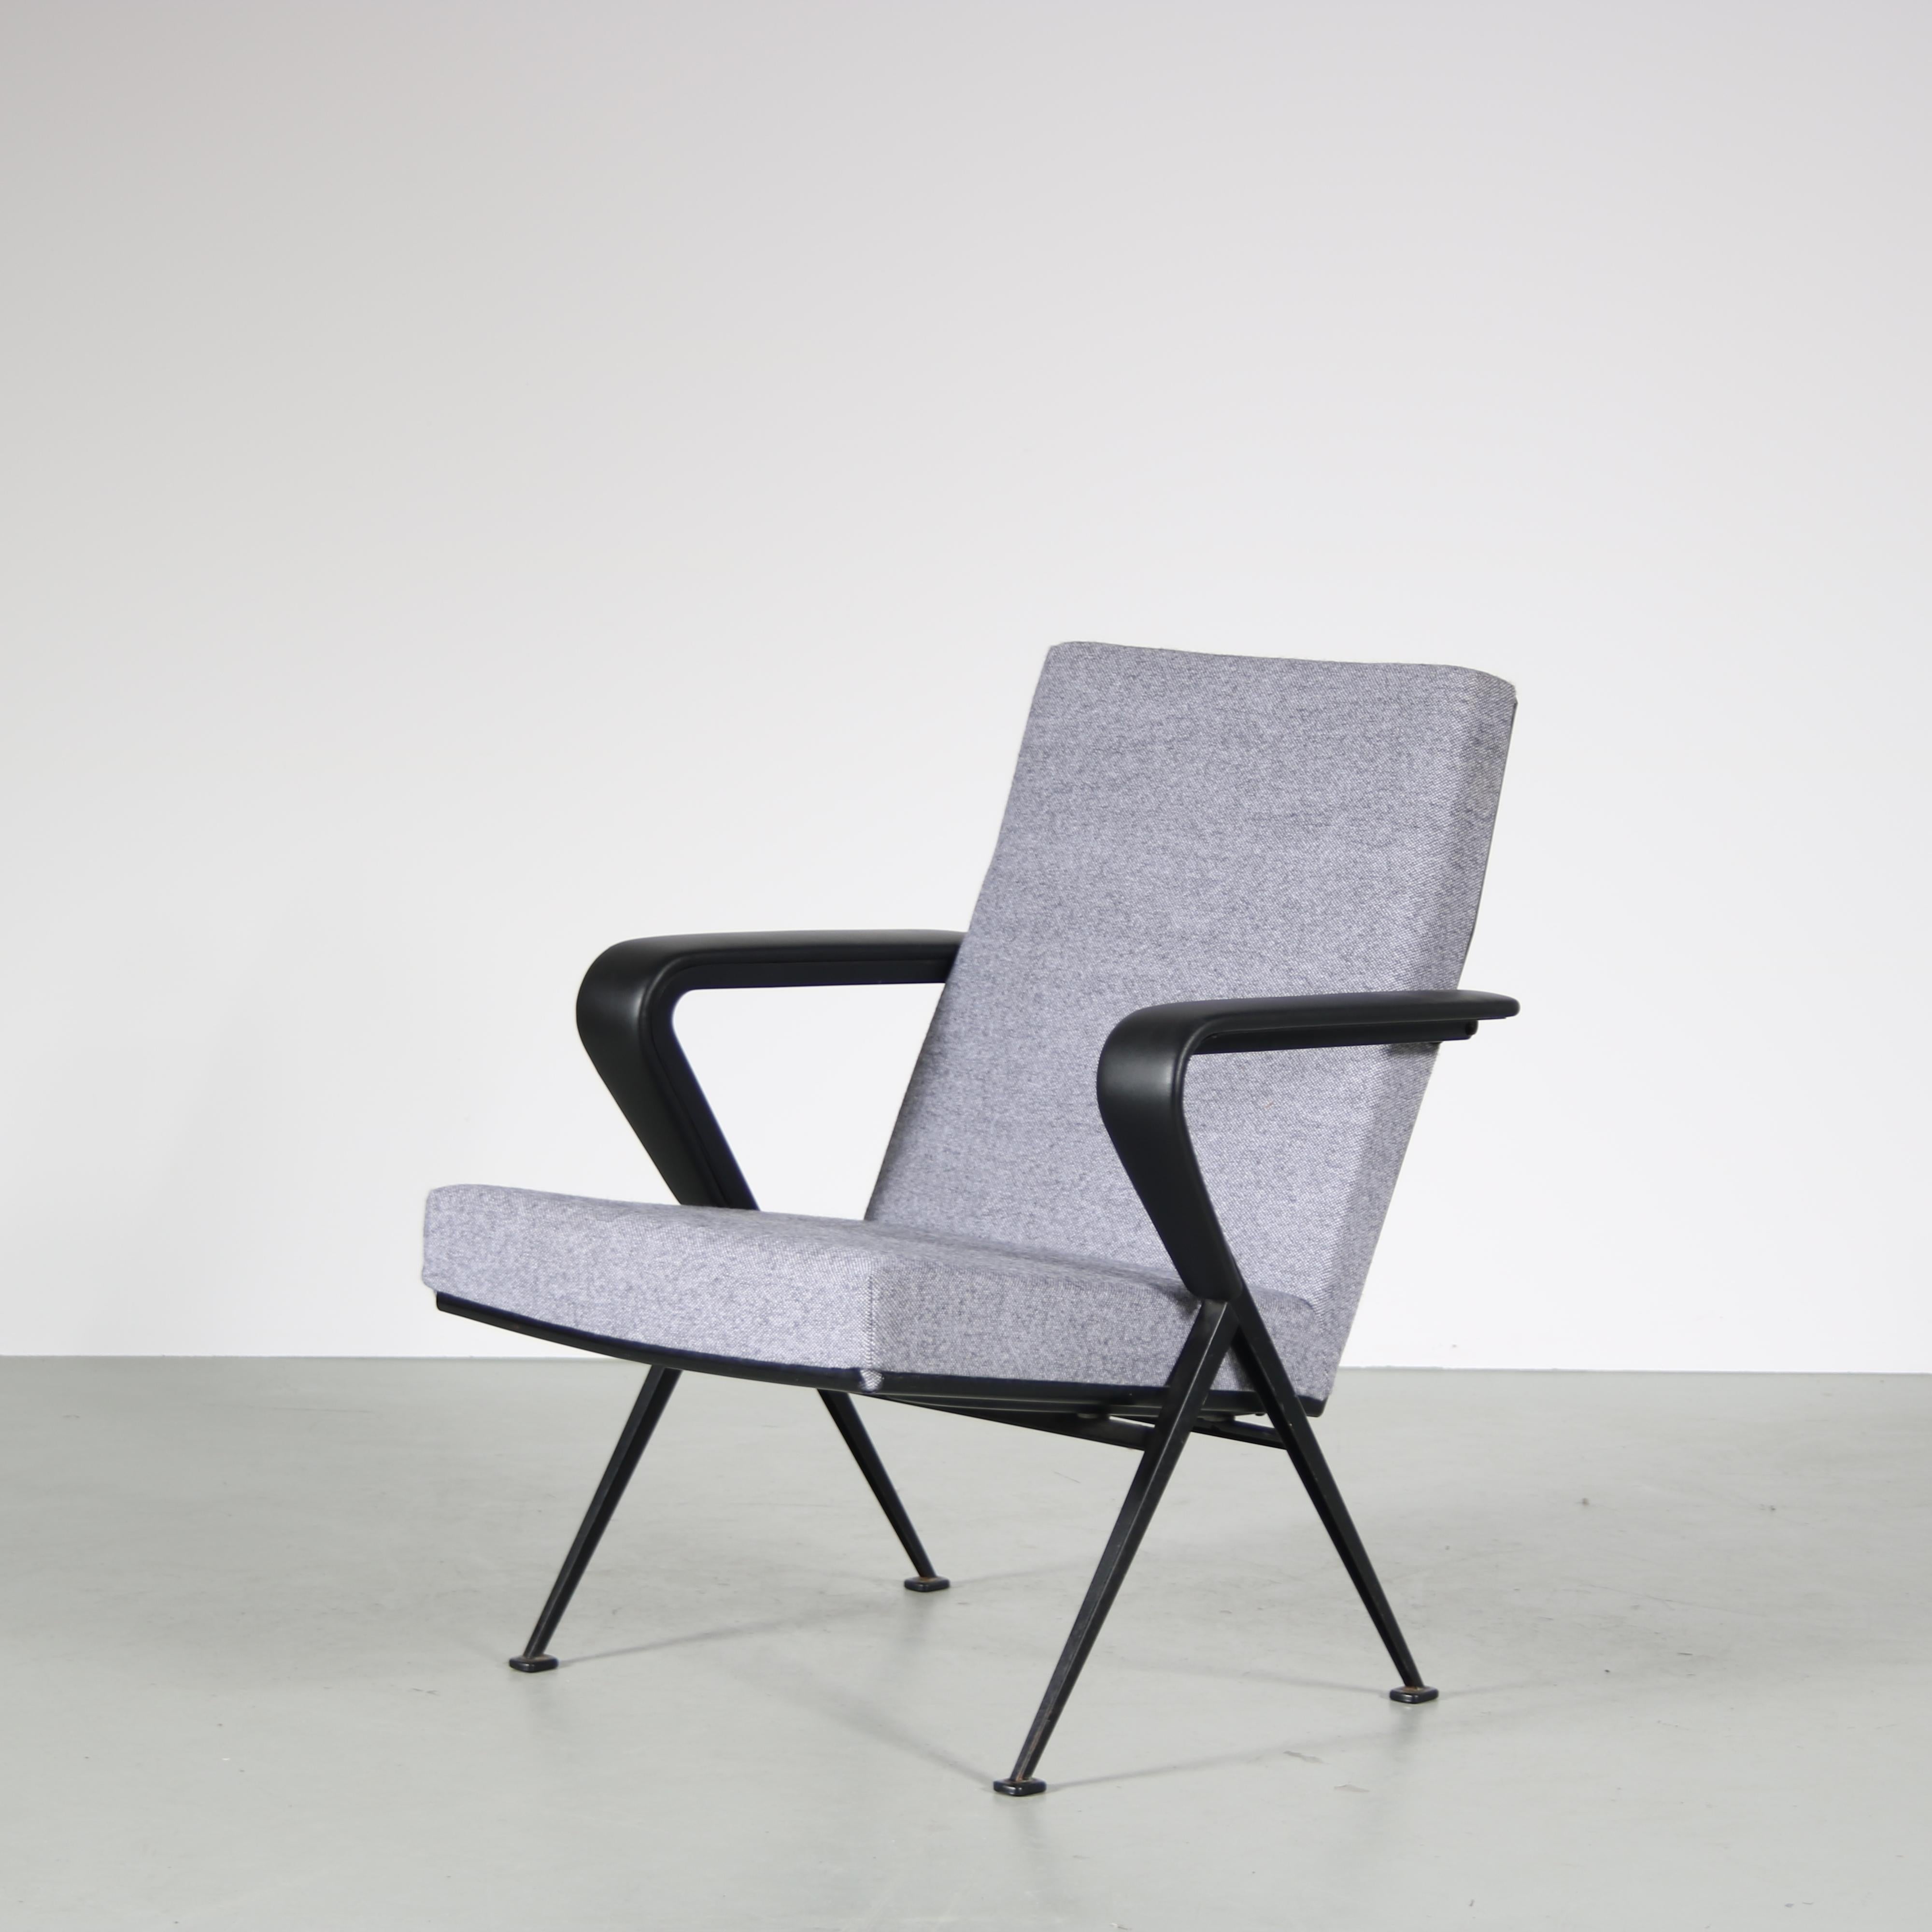 1960s Pair of “Repose” Chairs by Friso Kramer for Ahrend de Cirkel, Netherlands For Sale 1